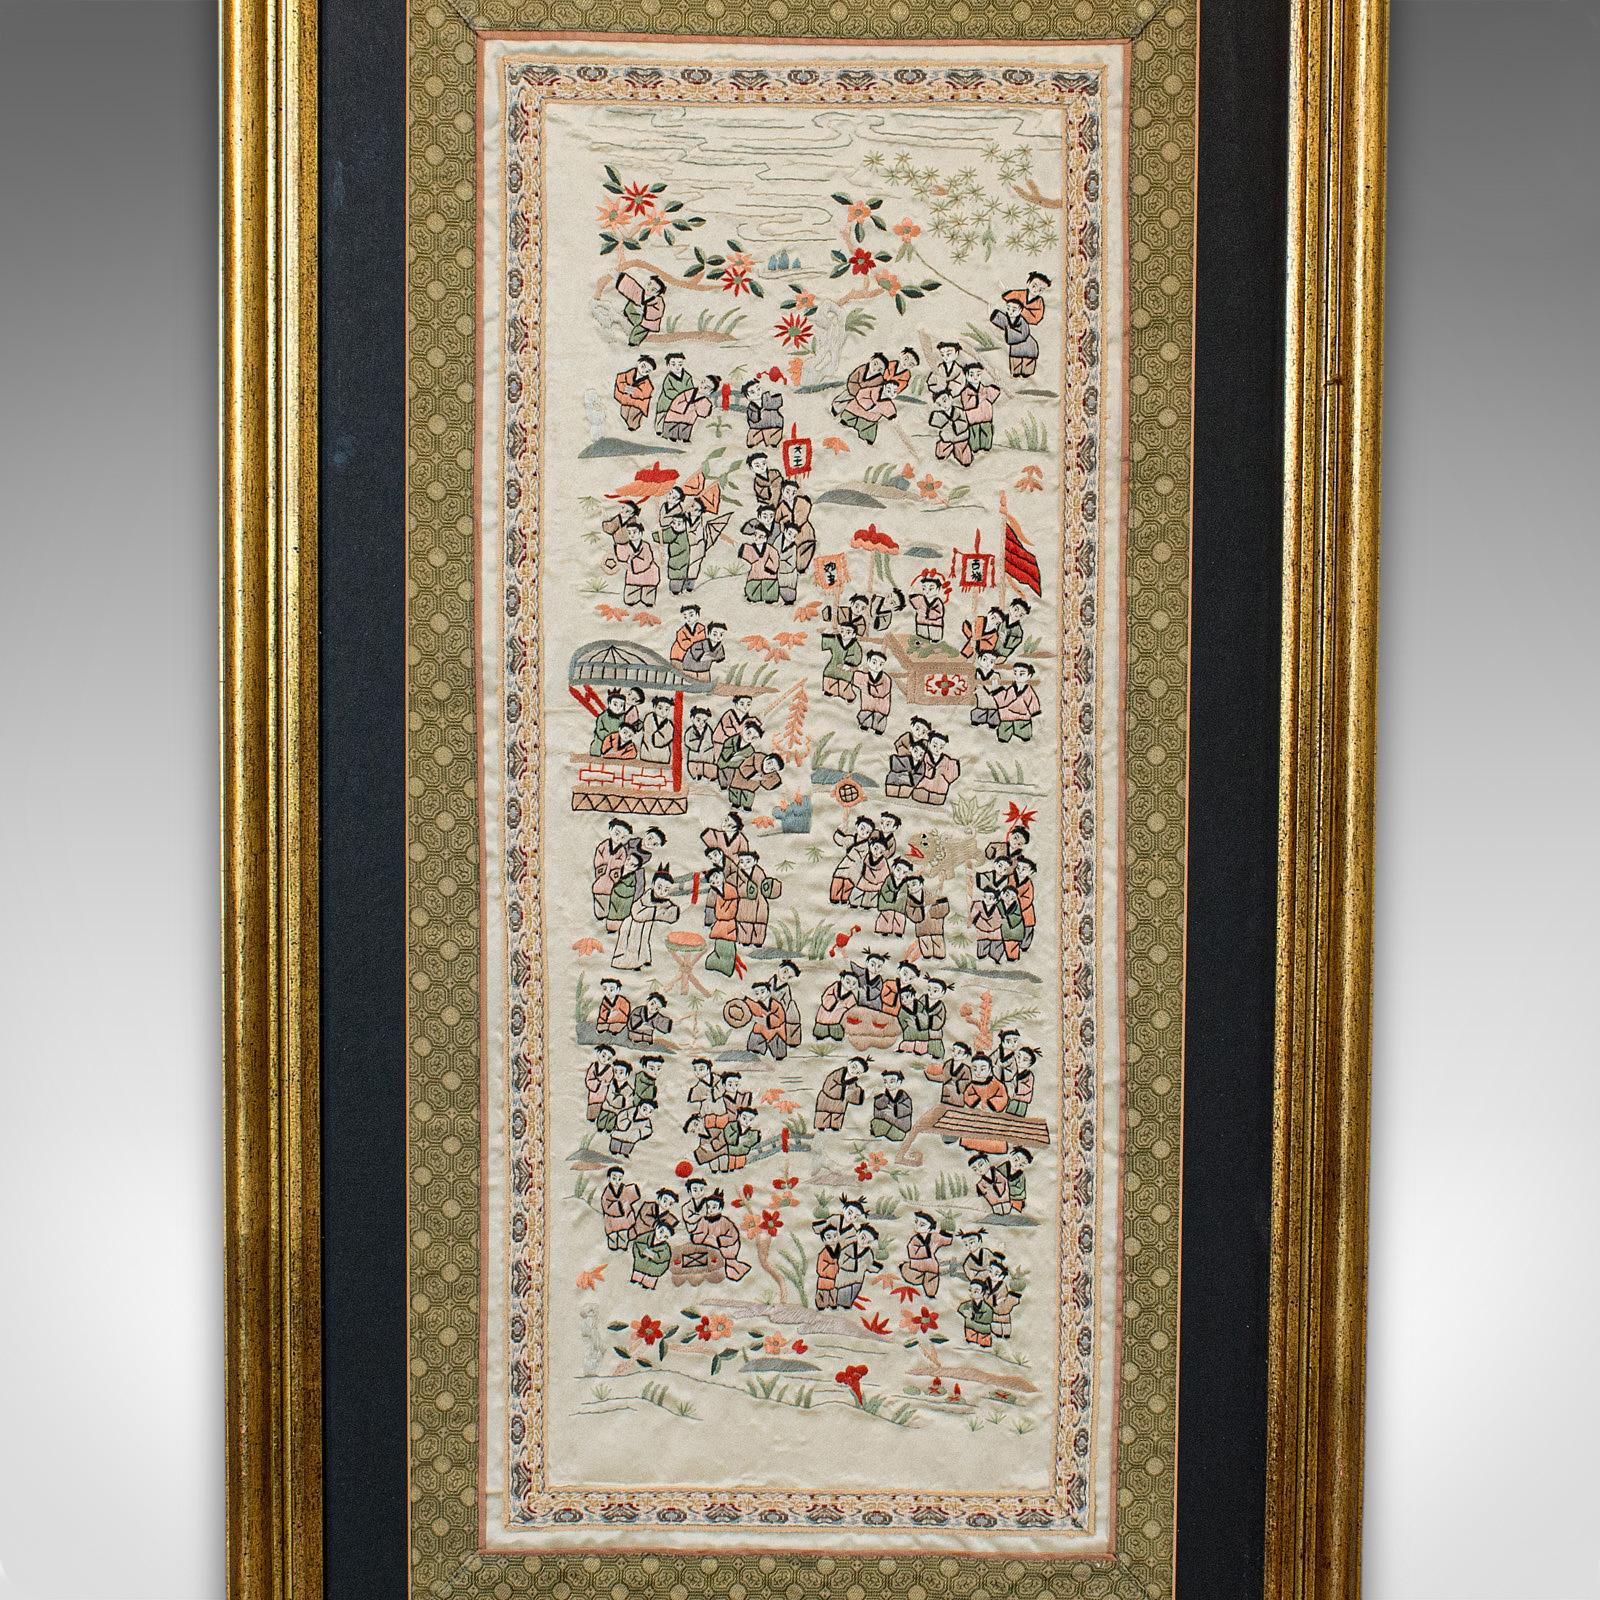 Chinese Export Antique Framed Silk Panel, Oriental, Embroidered, Decorative, 100 Children, 1900 For Sale